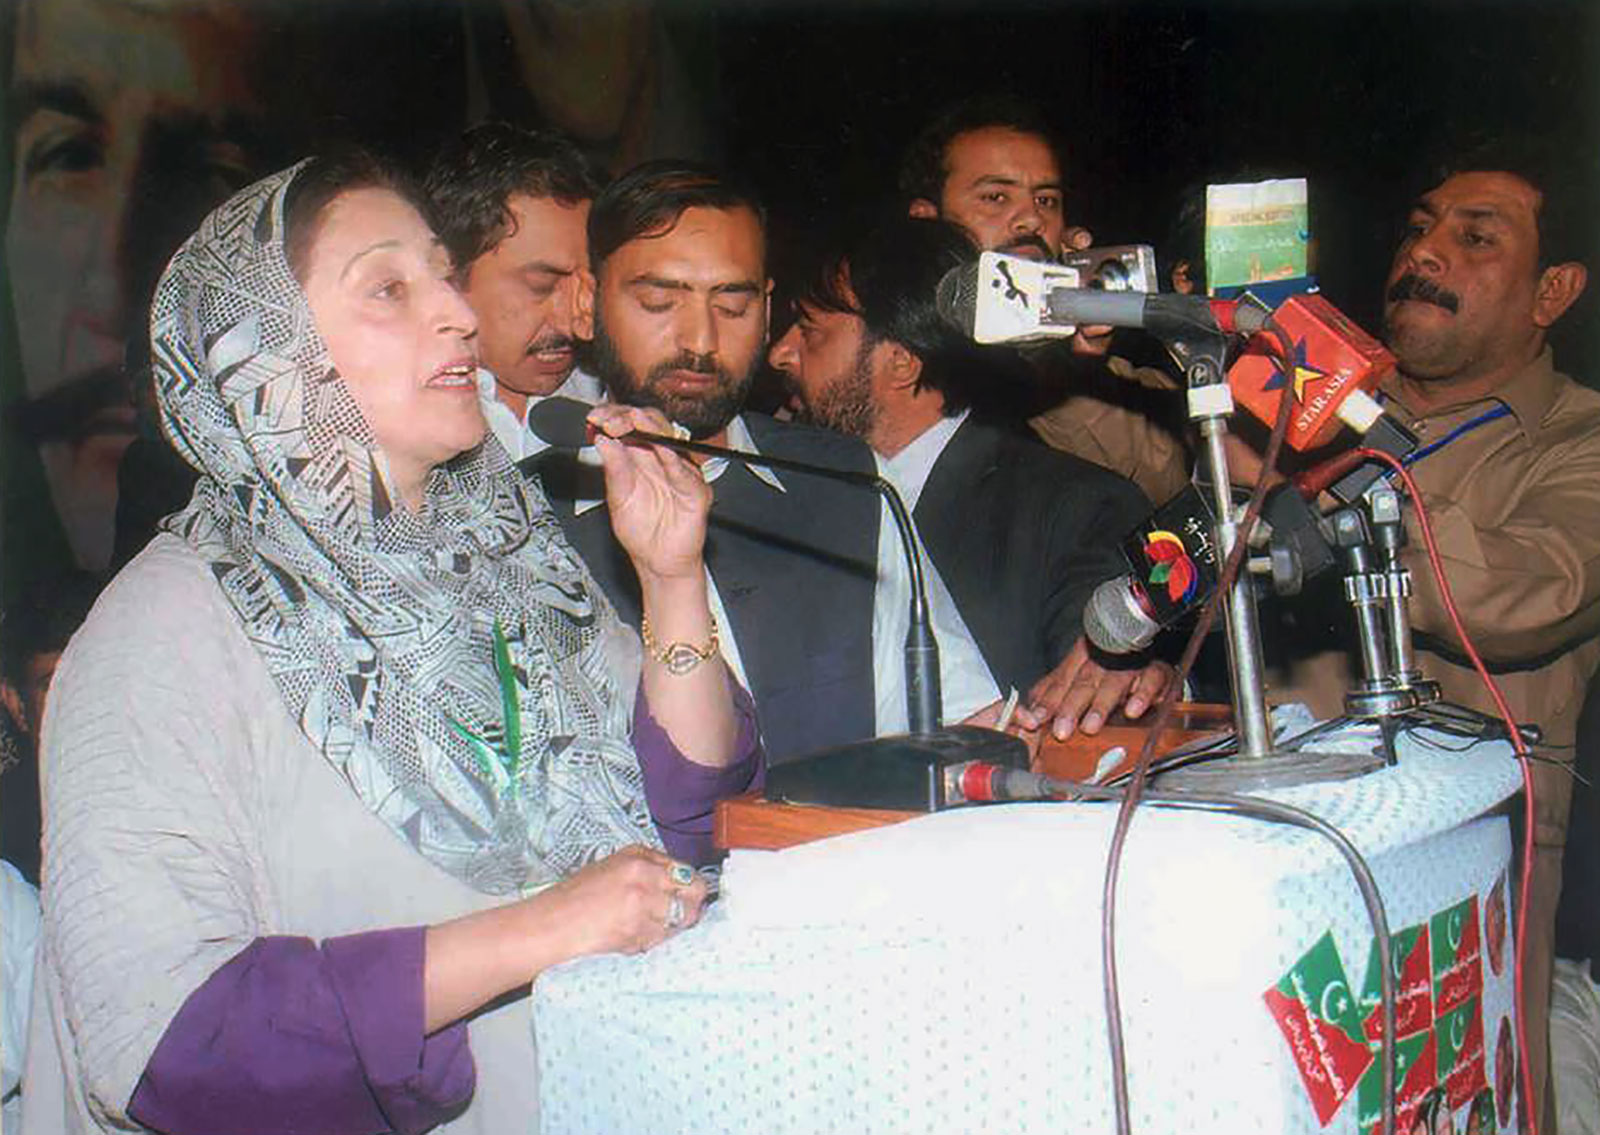 “Although I joined a political party later in my career, politics was always in my blood,” Shahida says.